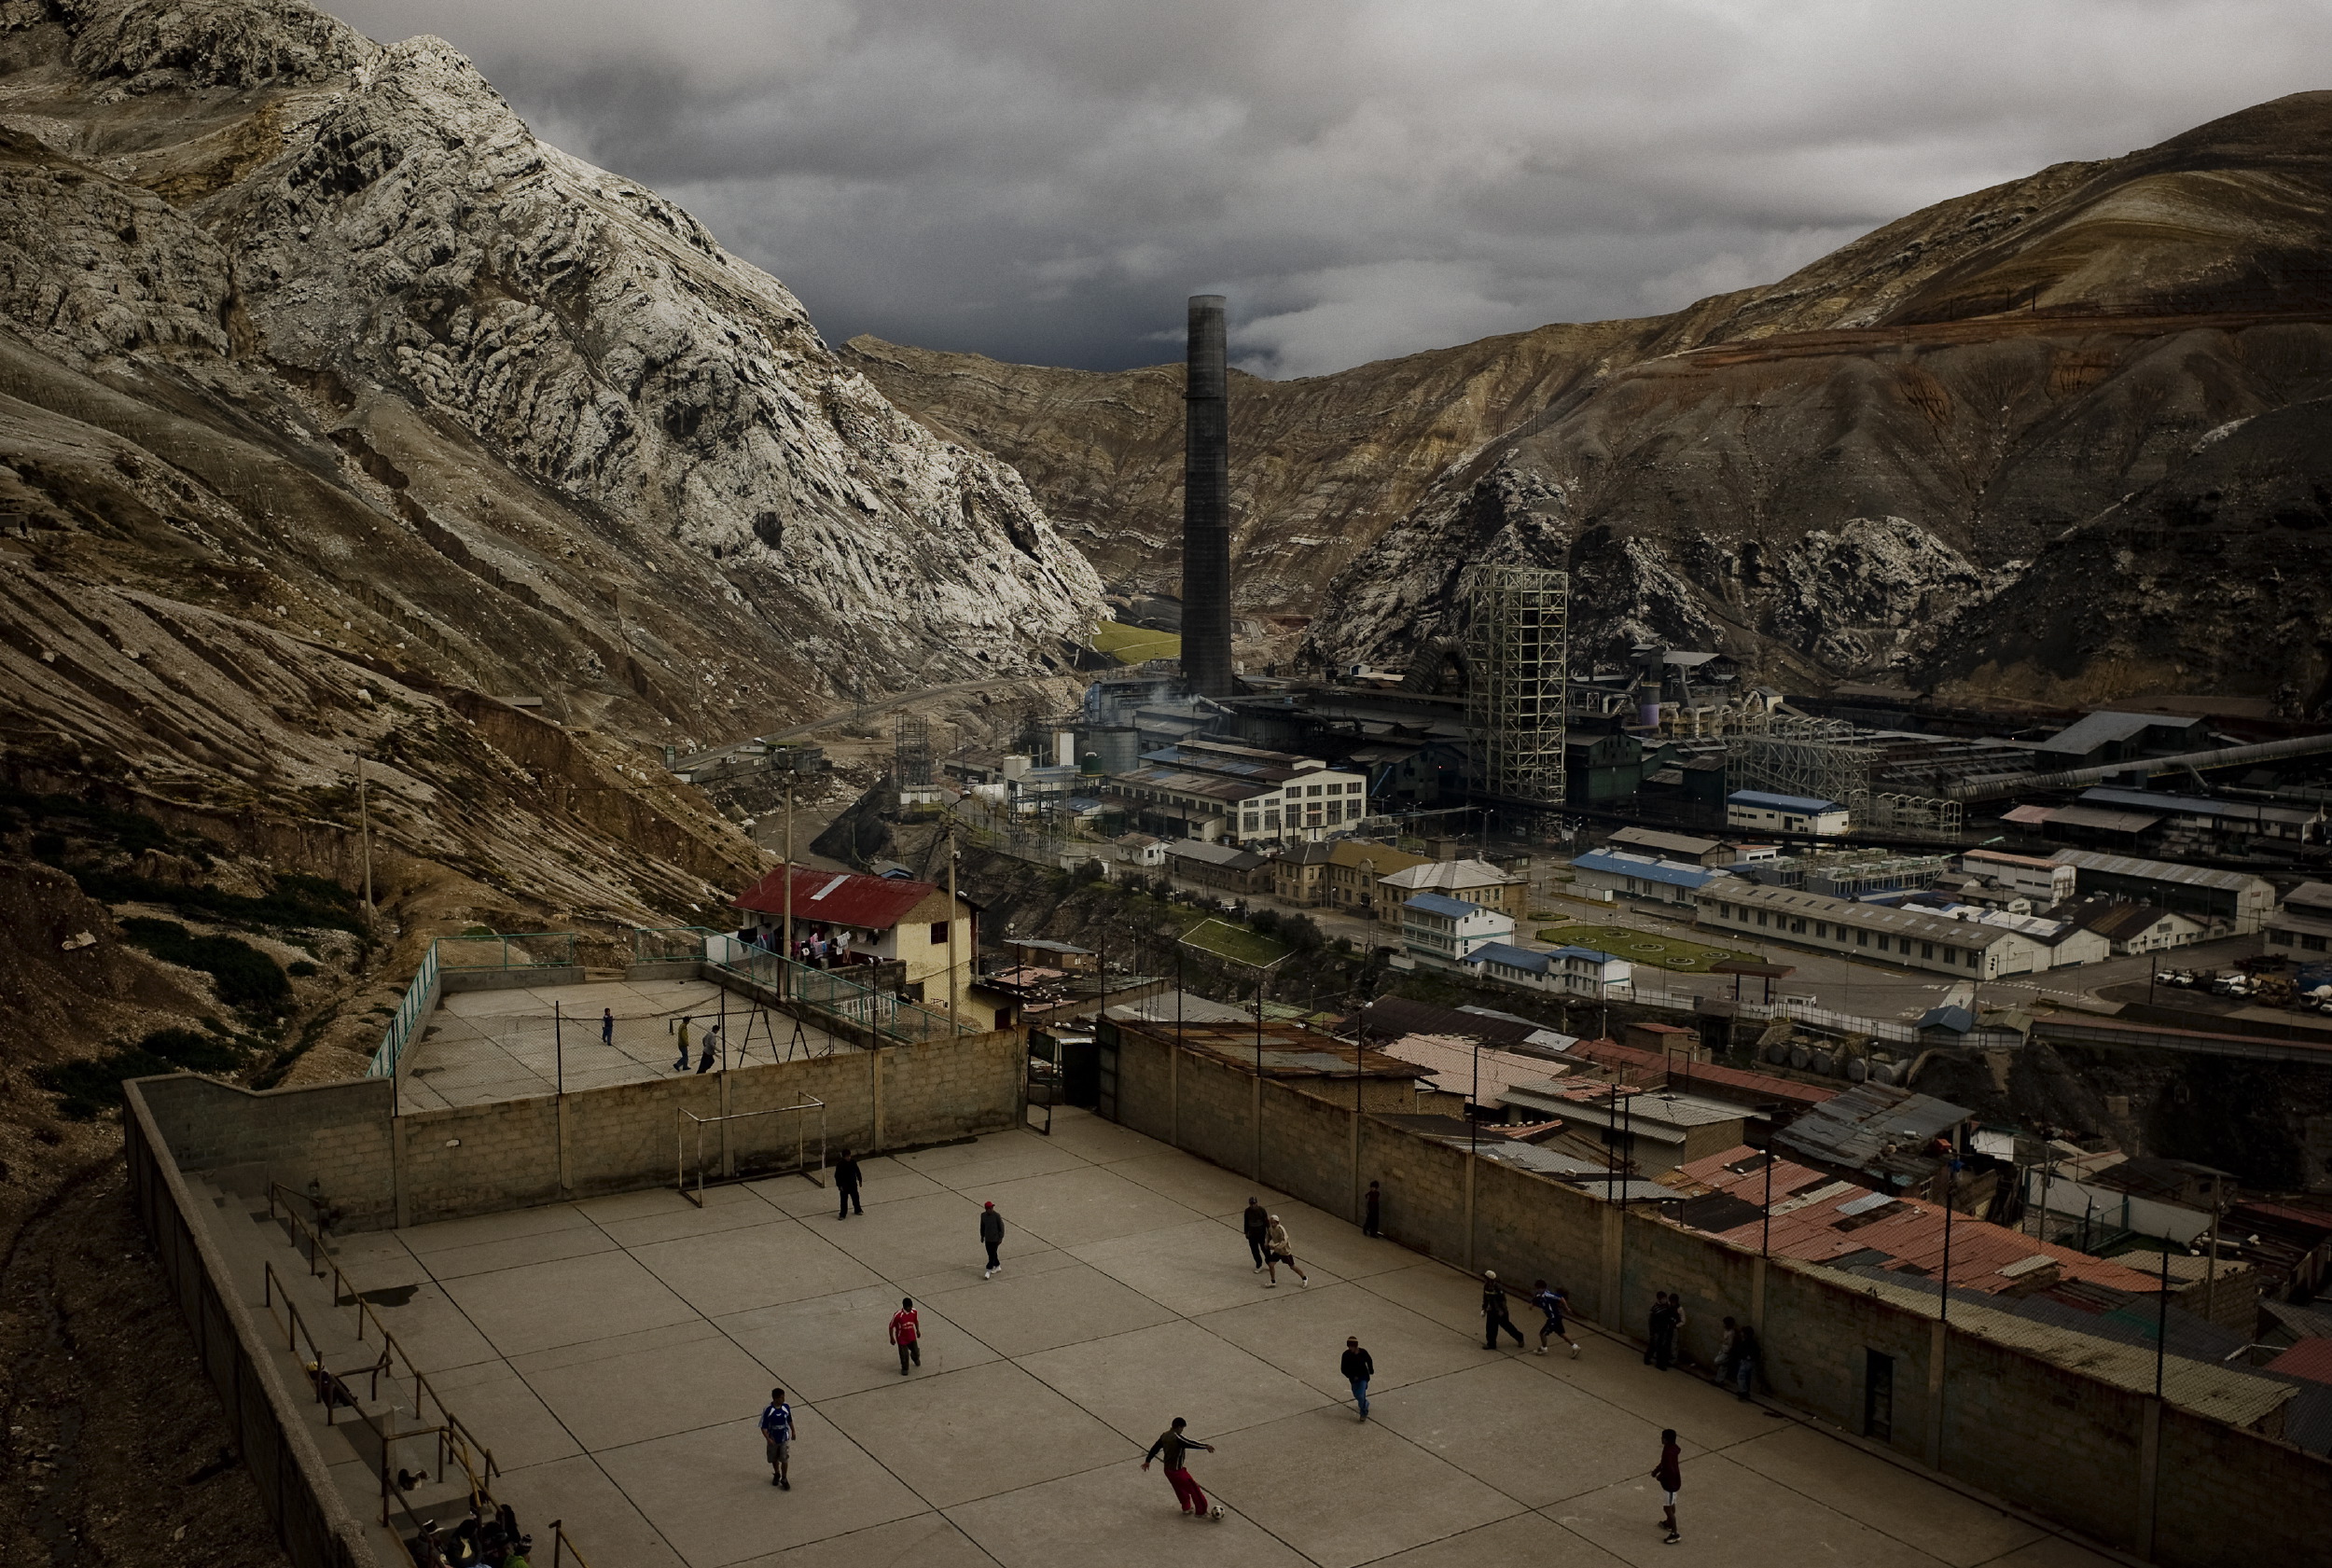 Youth play soccer in La Oroya next to the American-owned smelter Doe Run Peru. This photo was taken in April 10, 2009, when production was almost completelly suspended due to an allegedly financial crisis in the company, now it is still closed. The company claims that it was not able to carry out its environmental program in violation of its agreement with the goverment, arging economic reasons, but for years it was operating in defiant of enviromental regulations, in a city where many children have tested for high lead levels in their blood due to smelter pollution.